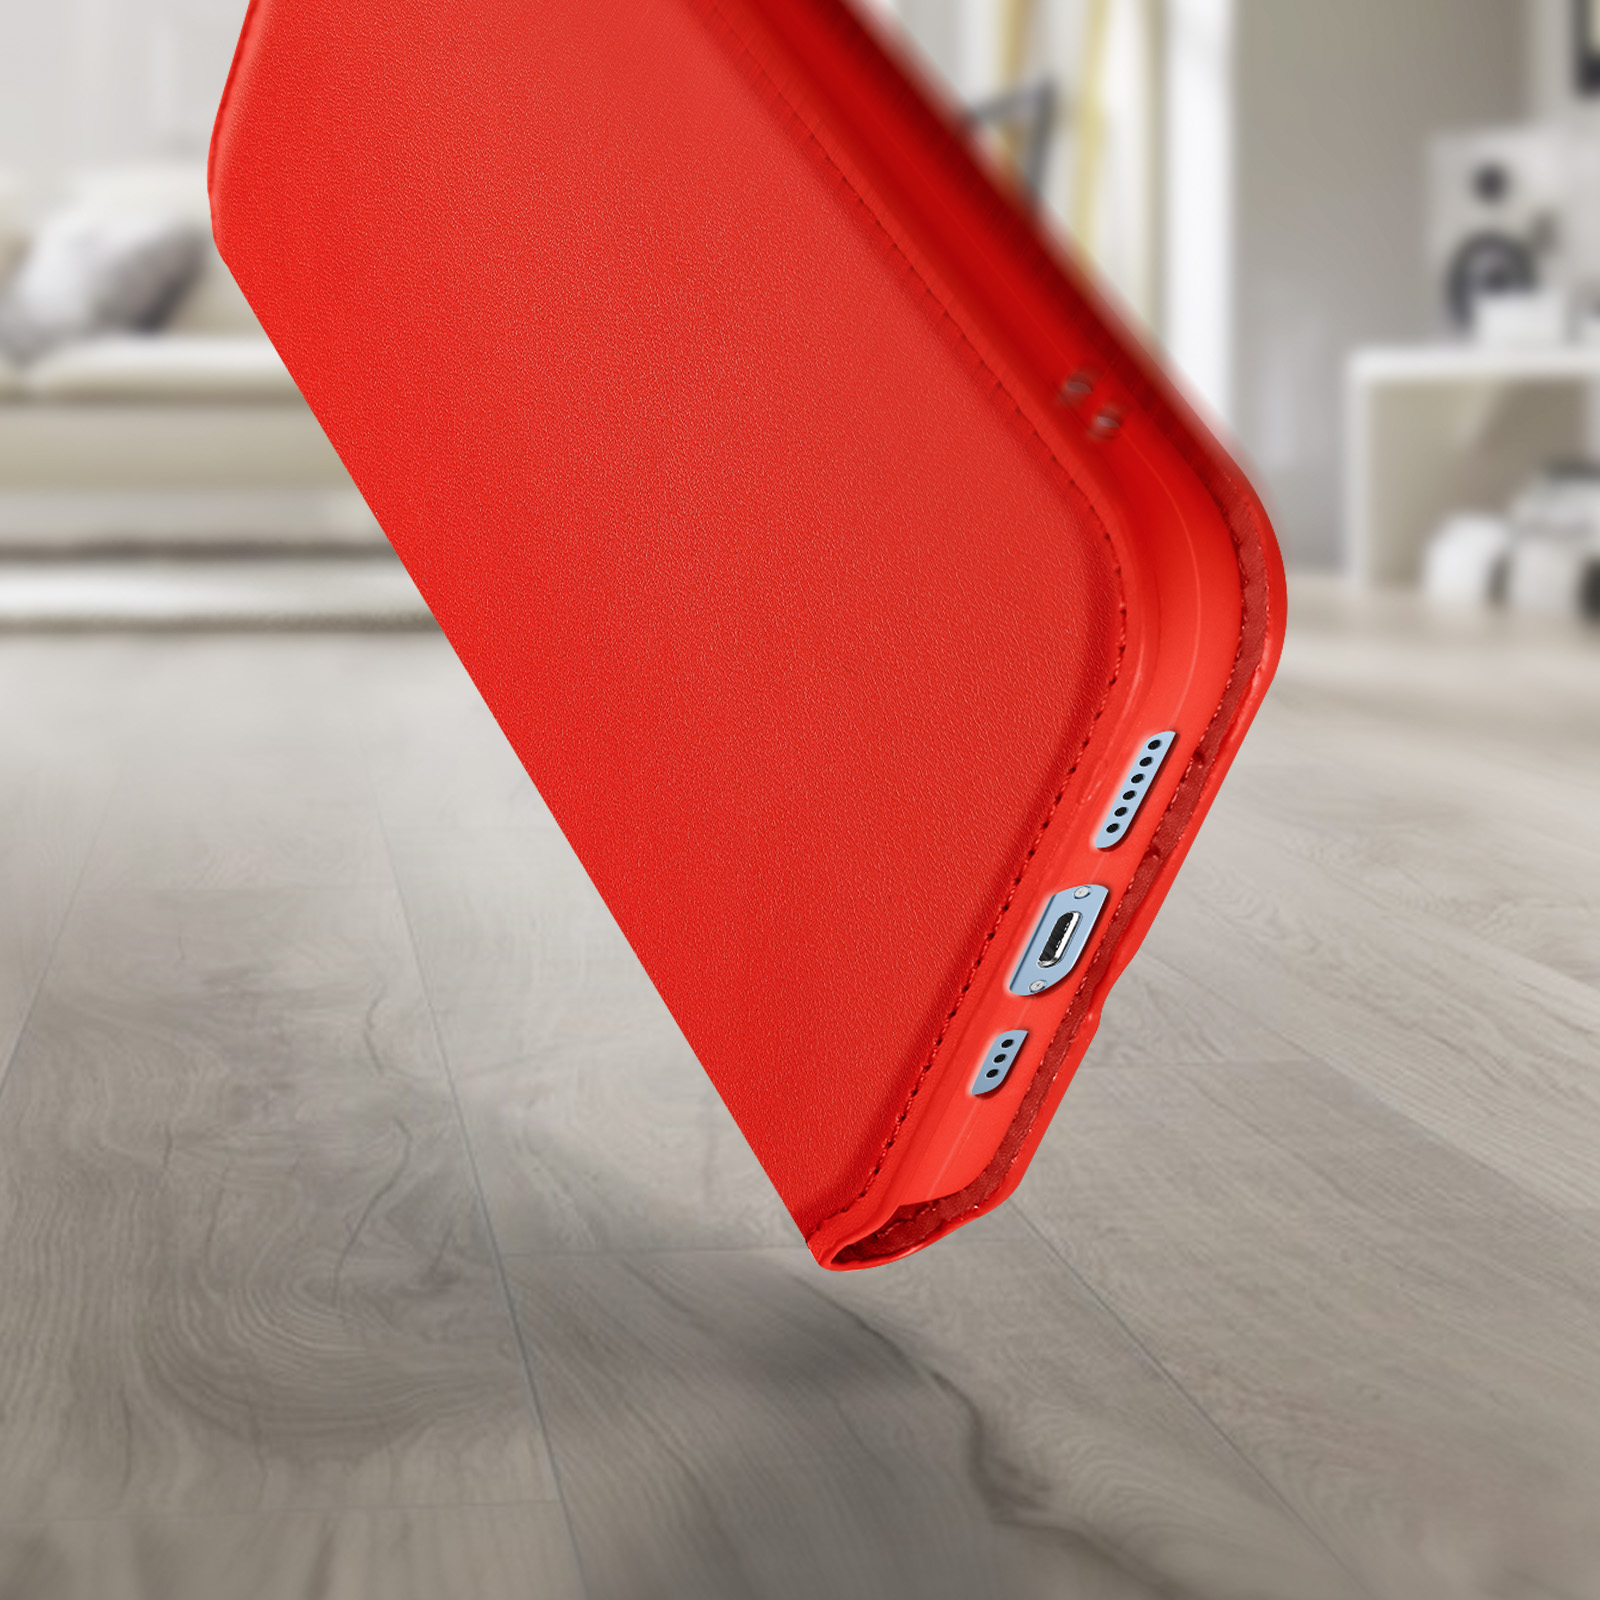 Etui Folio Stand Magnetique Compatible Apple iPhone 13 Rouge Neuf